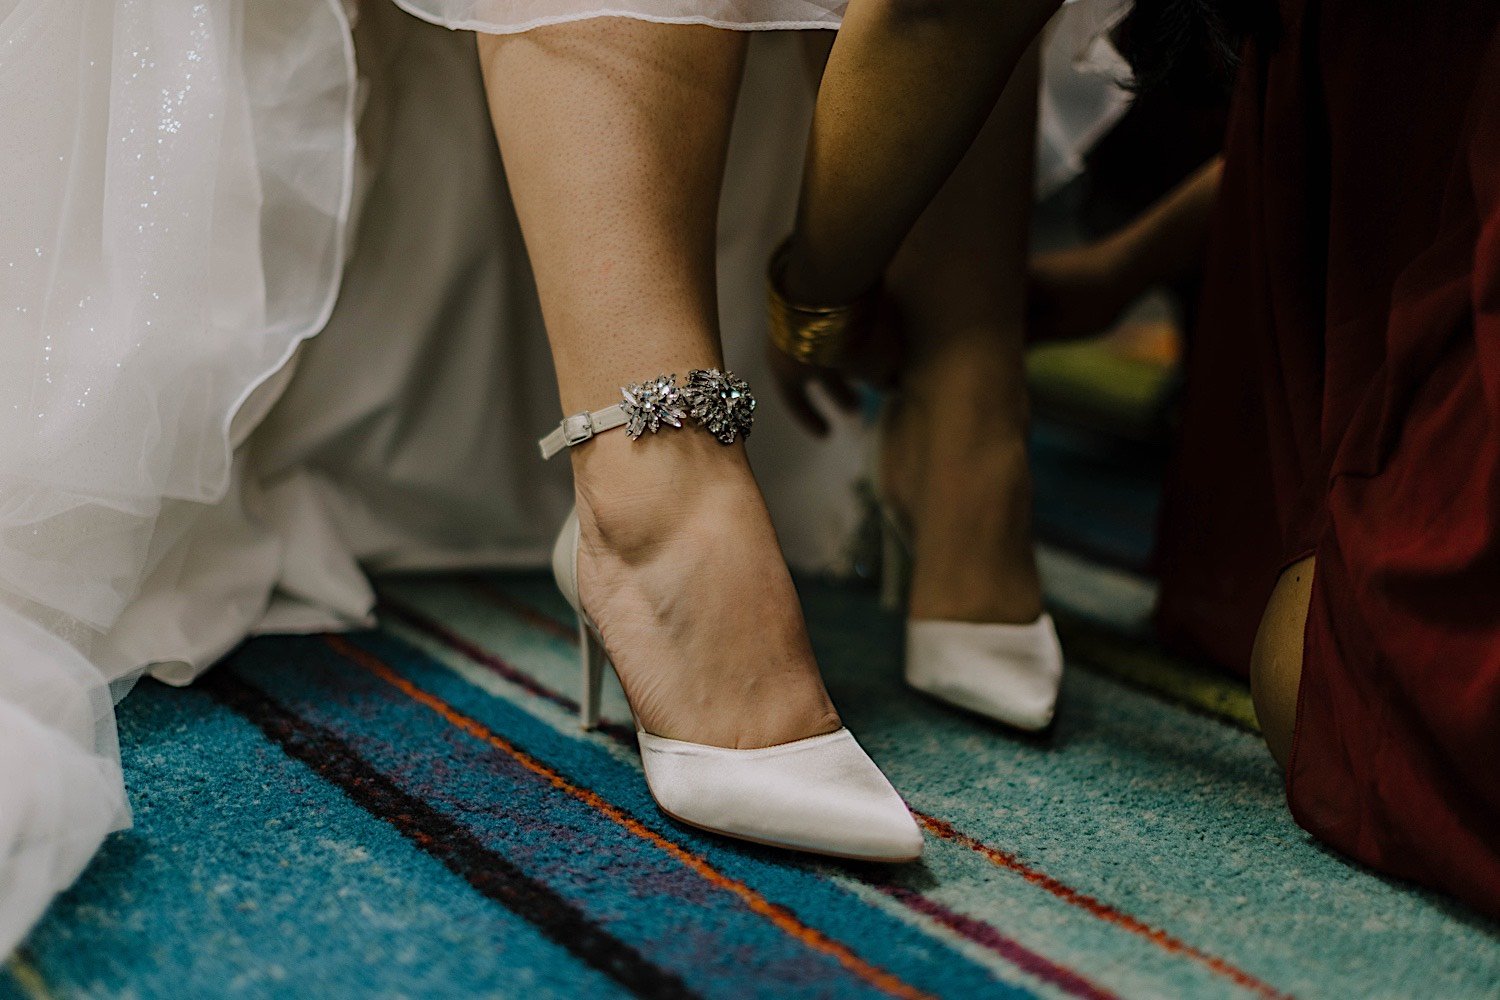 Close up of bride's shoes and anklet while wearing her wedding dress